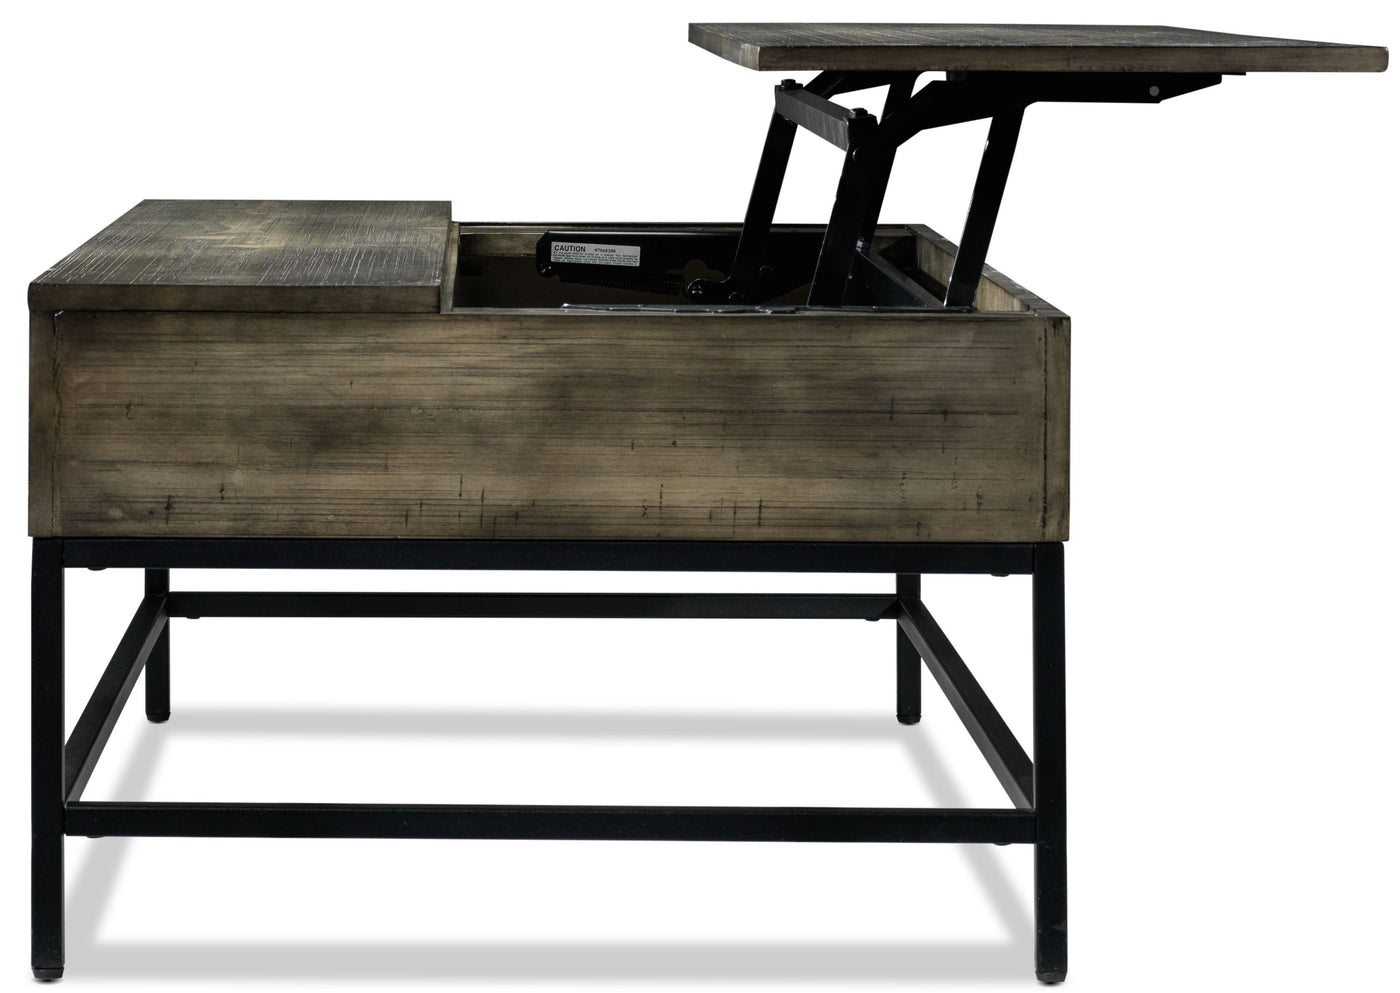 Asher Lift-Top Coffee Table - Grey